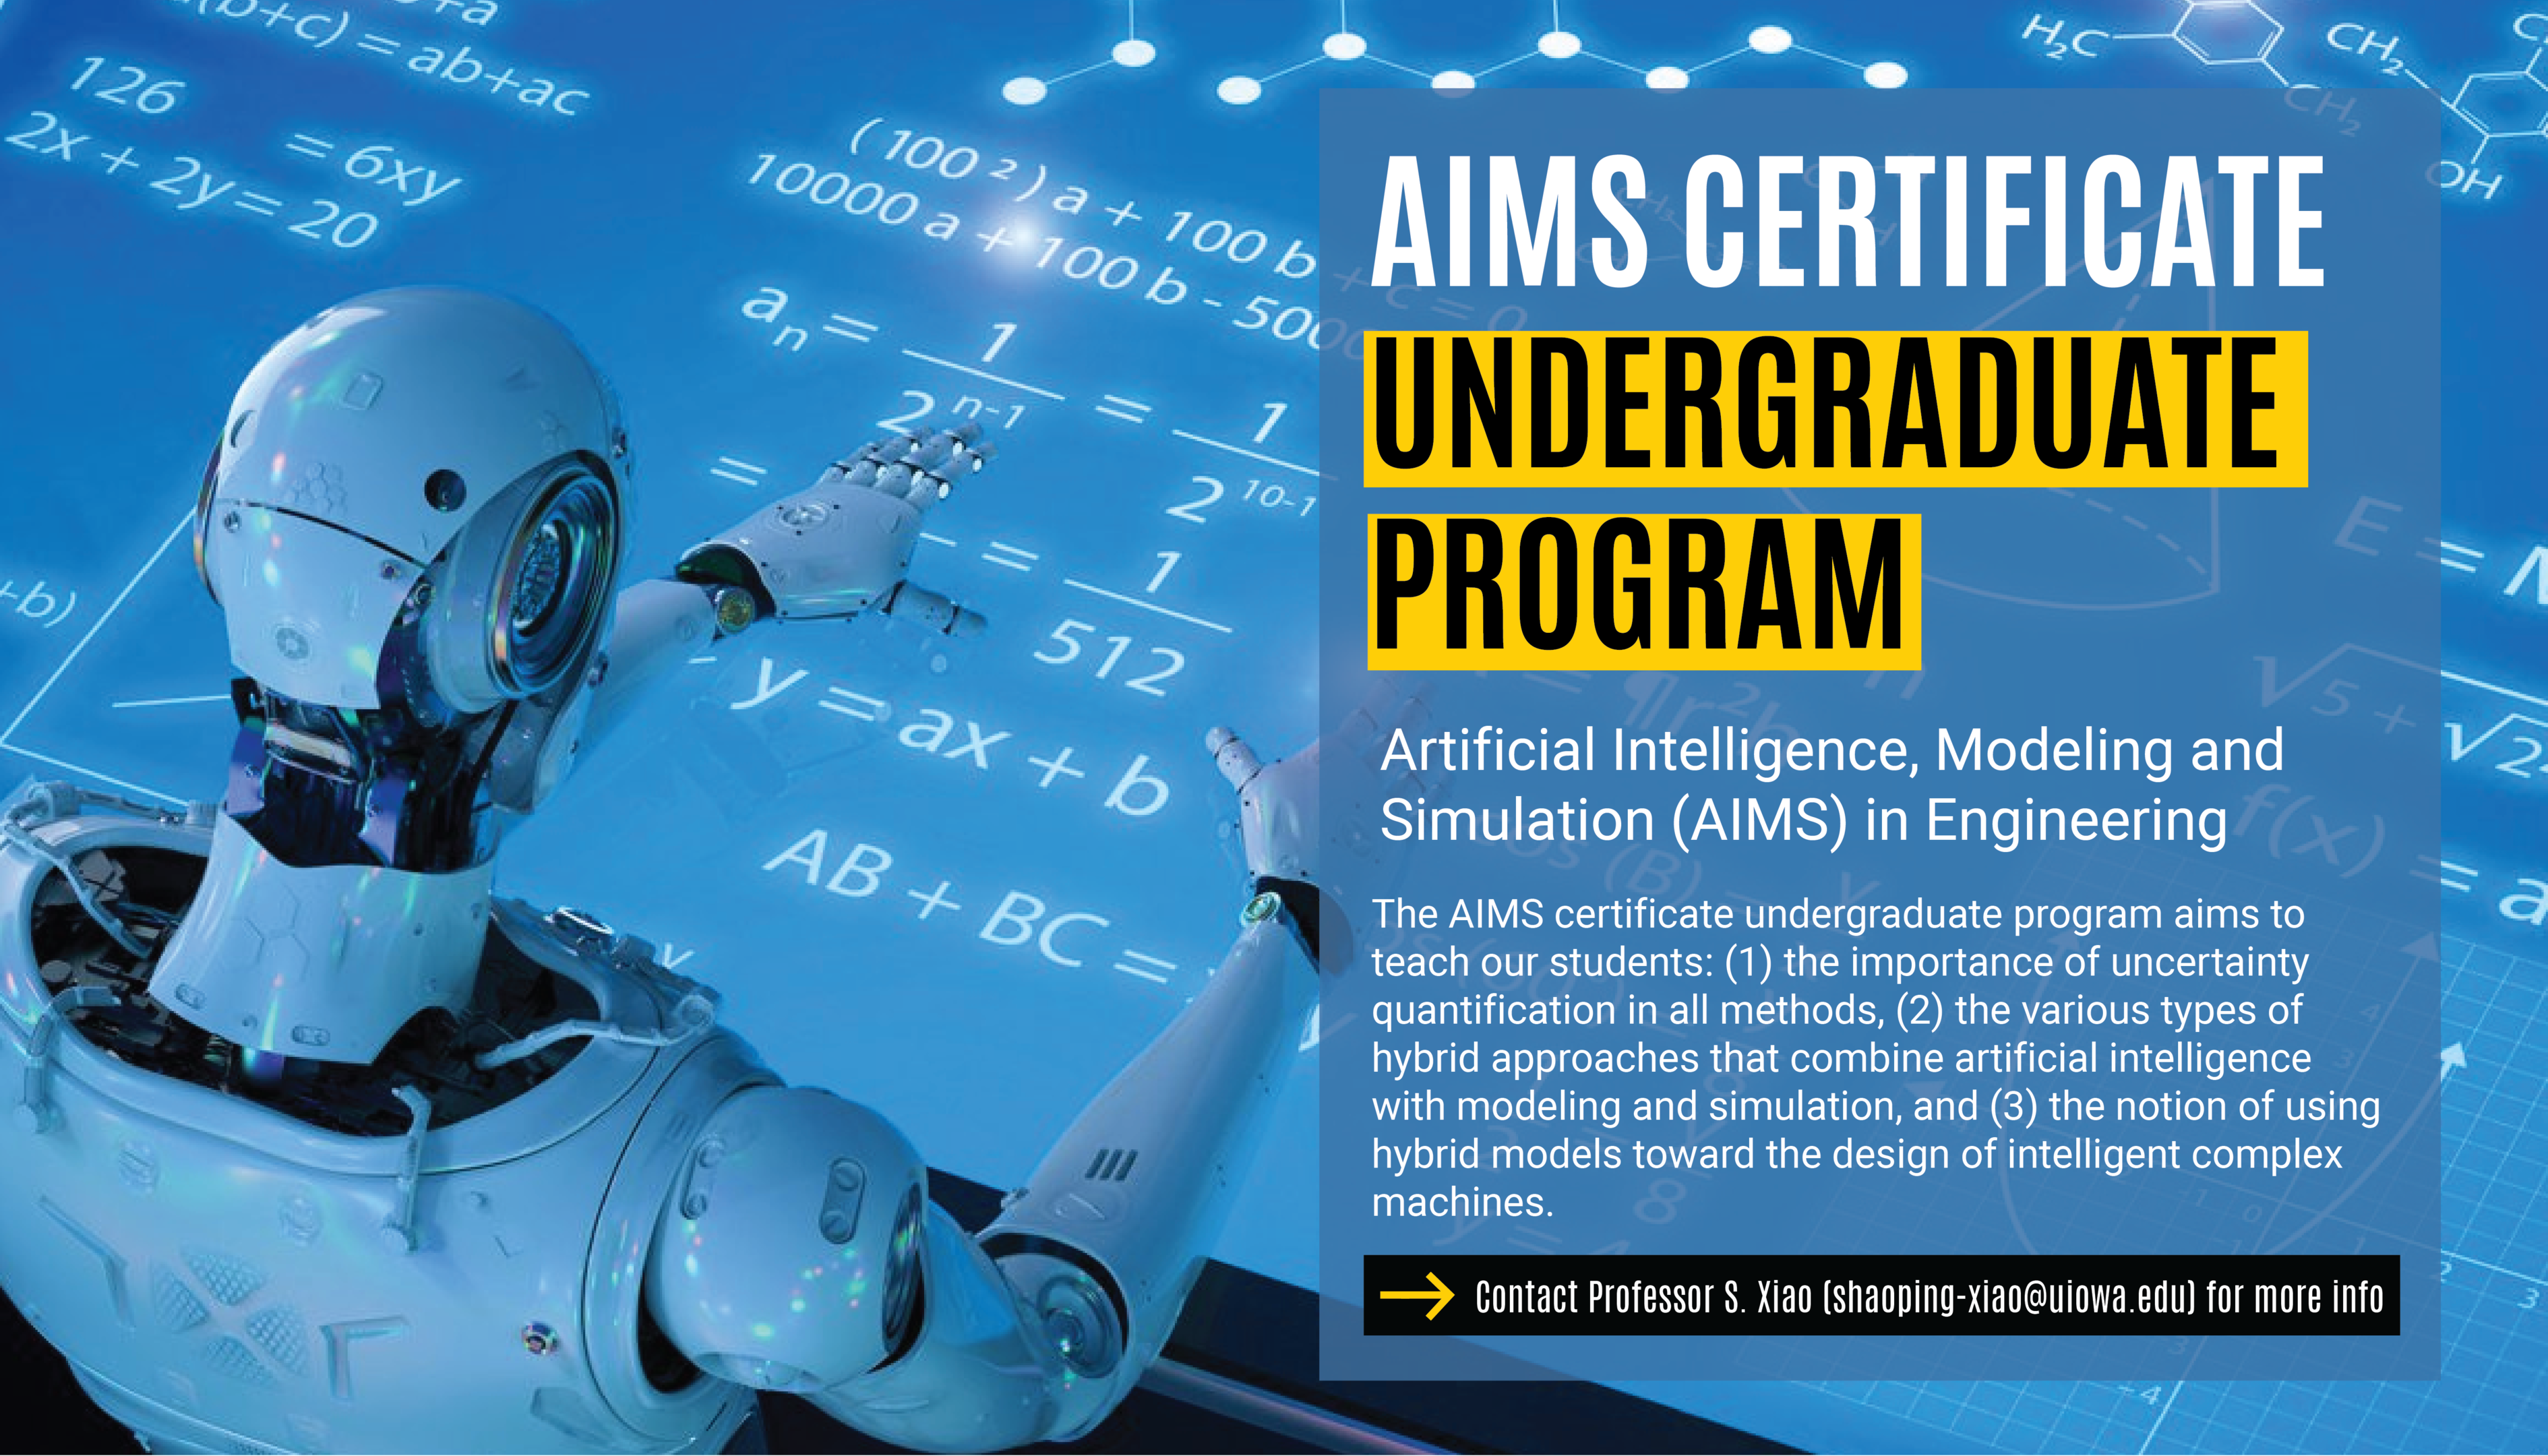 aims_certificate_undergrad_poster_final-01.png